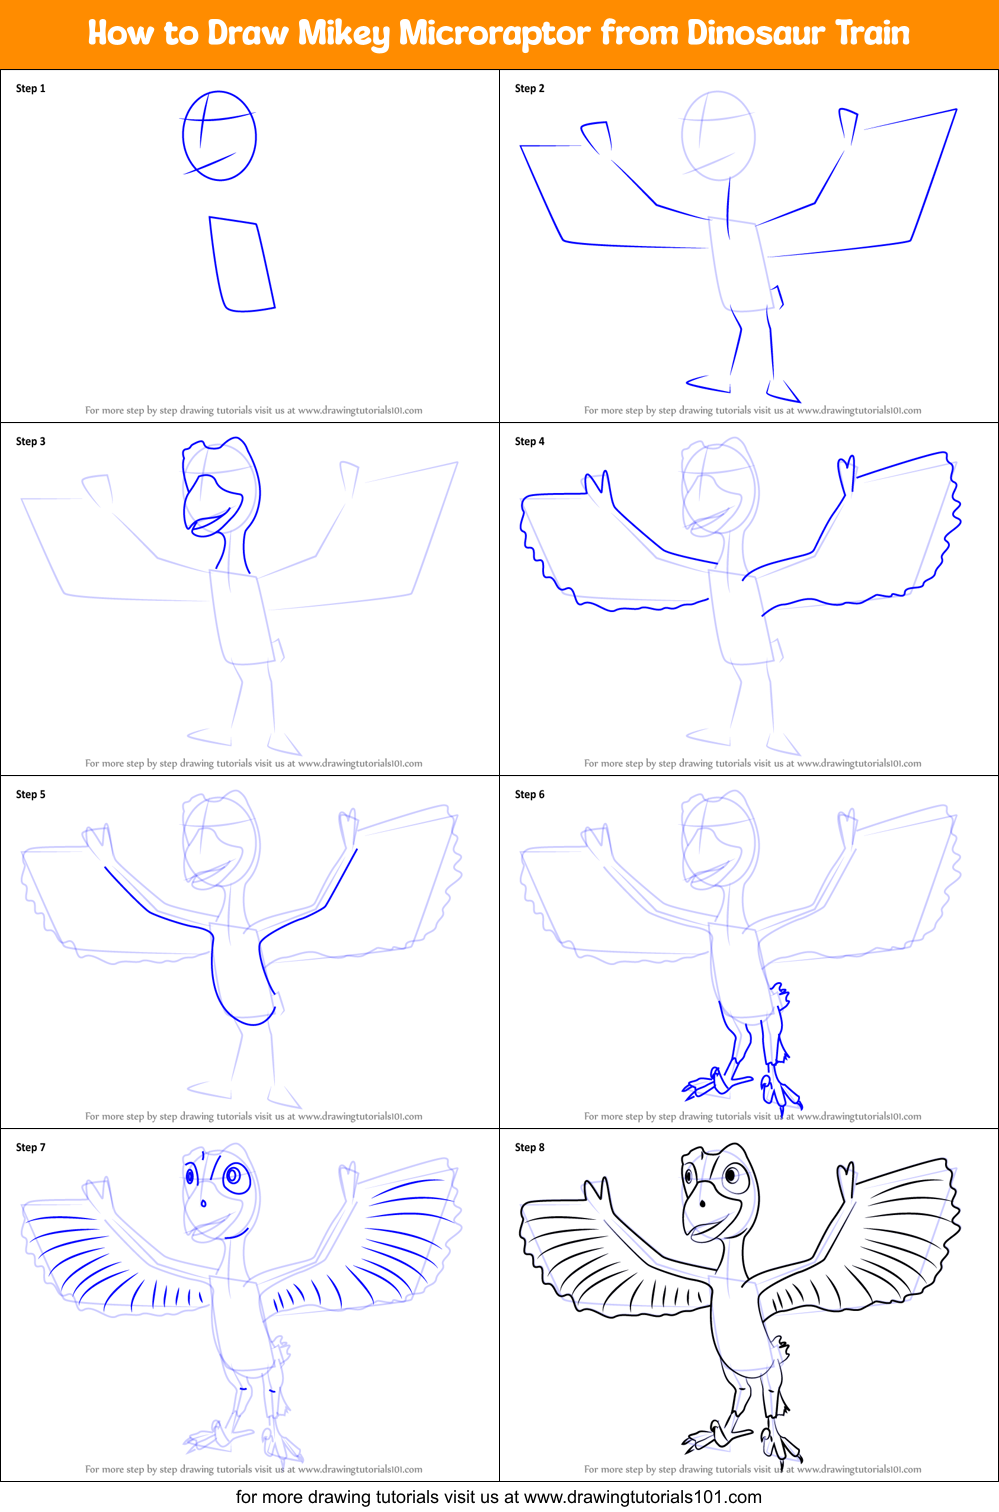 Download How to Draw Mikey Microraptor from Dinosaur Train printable step by step drawing sheet ...